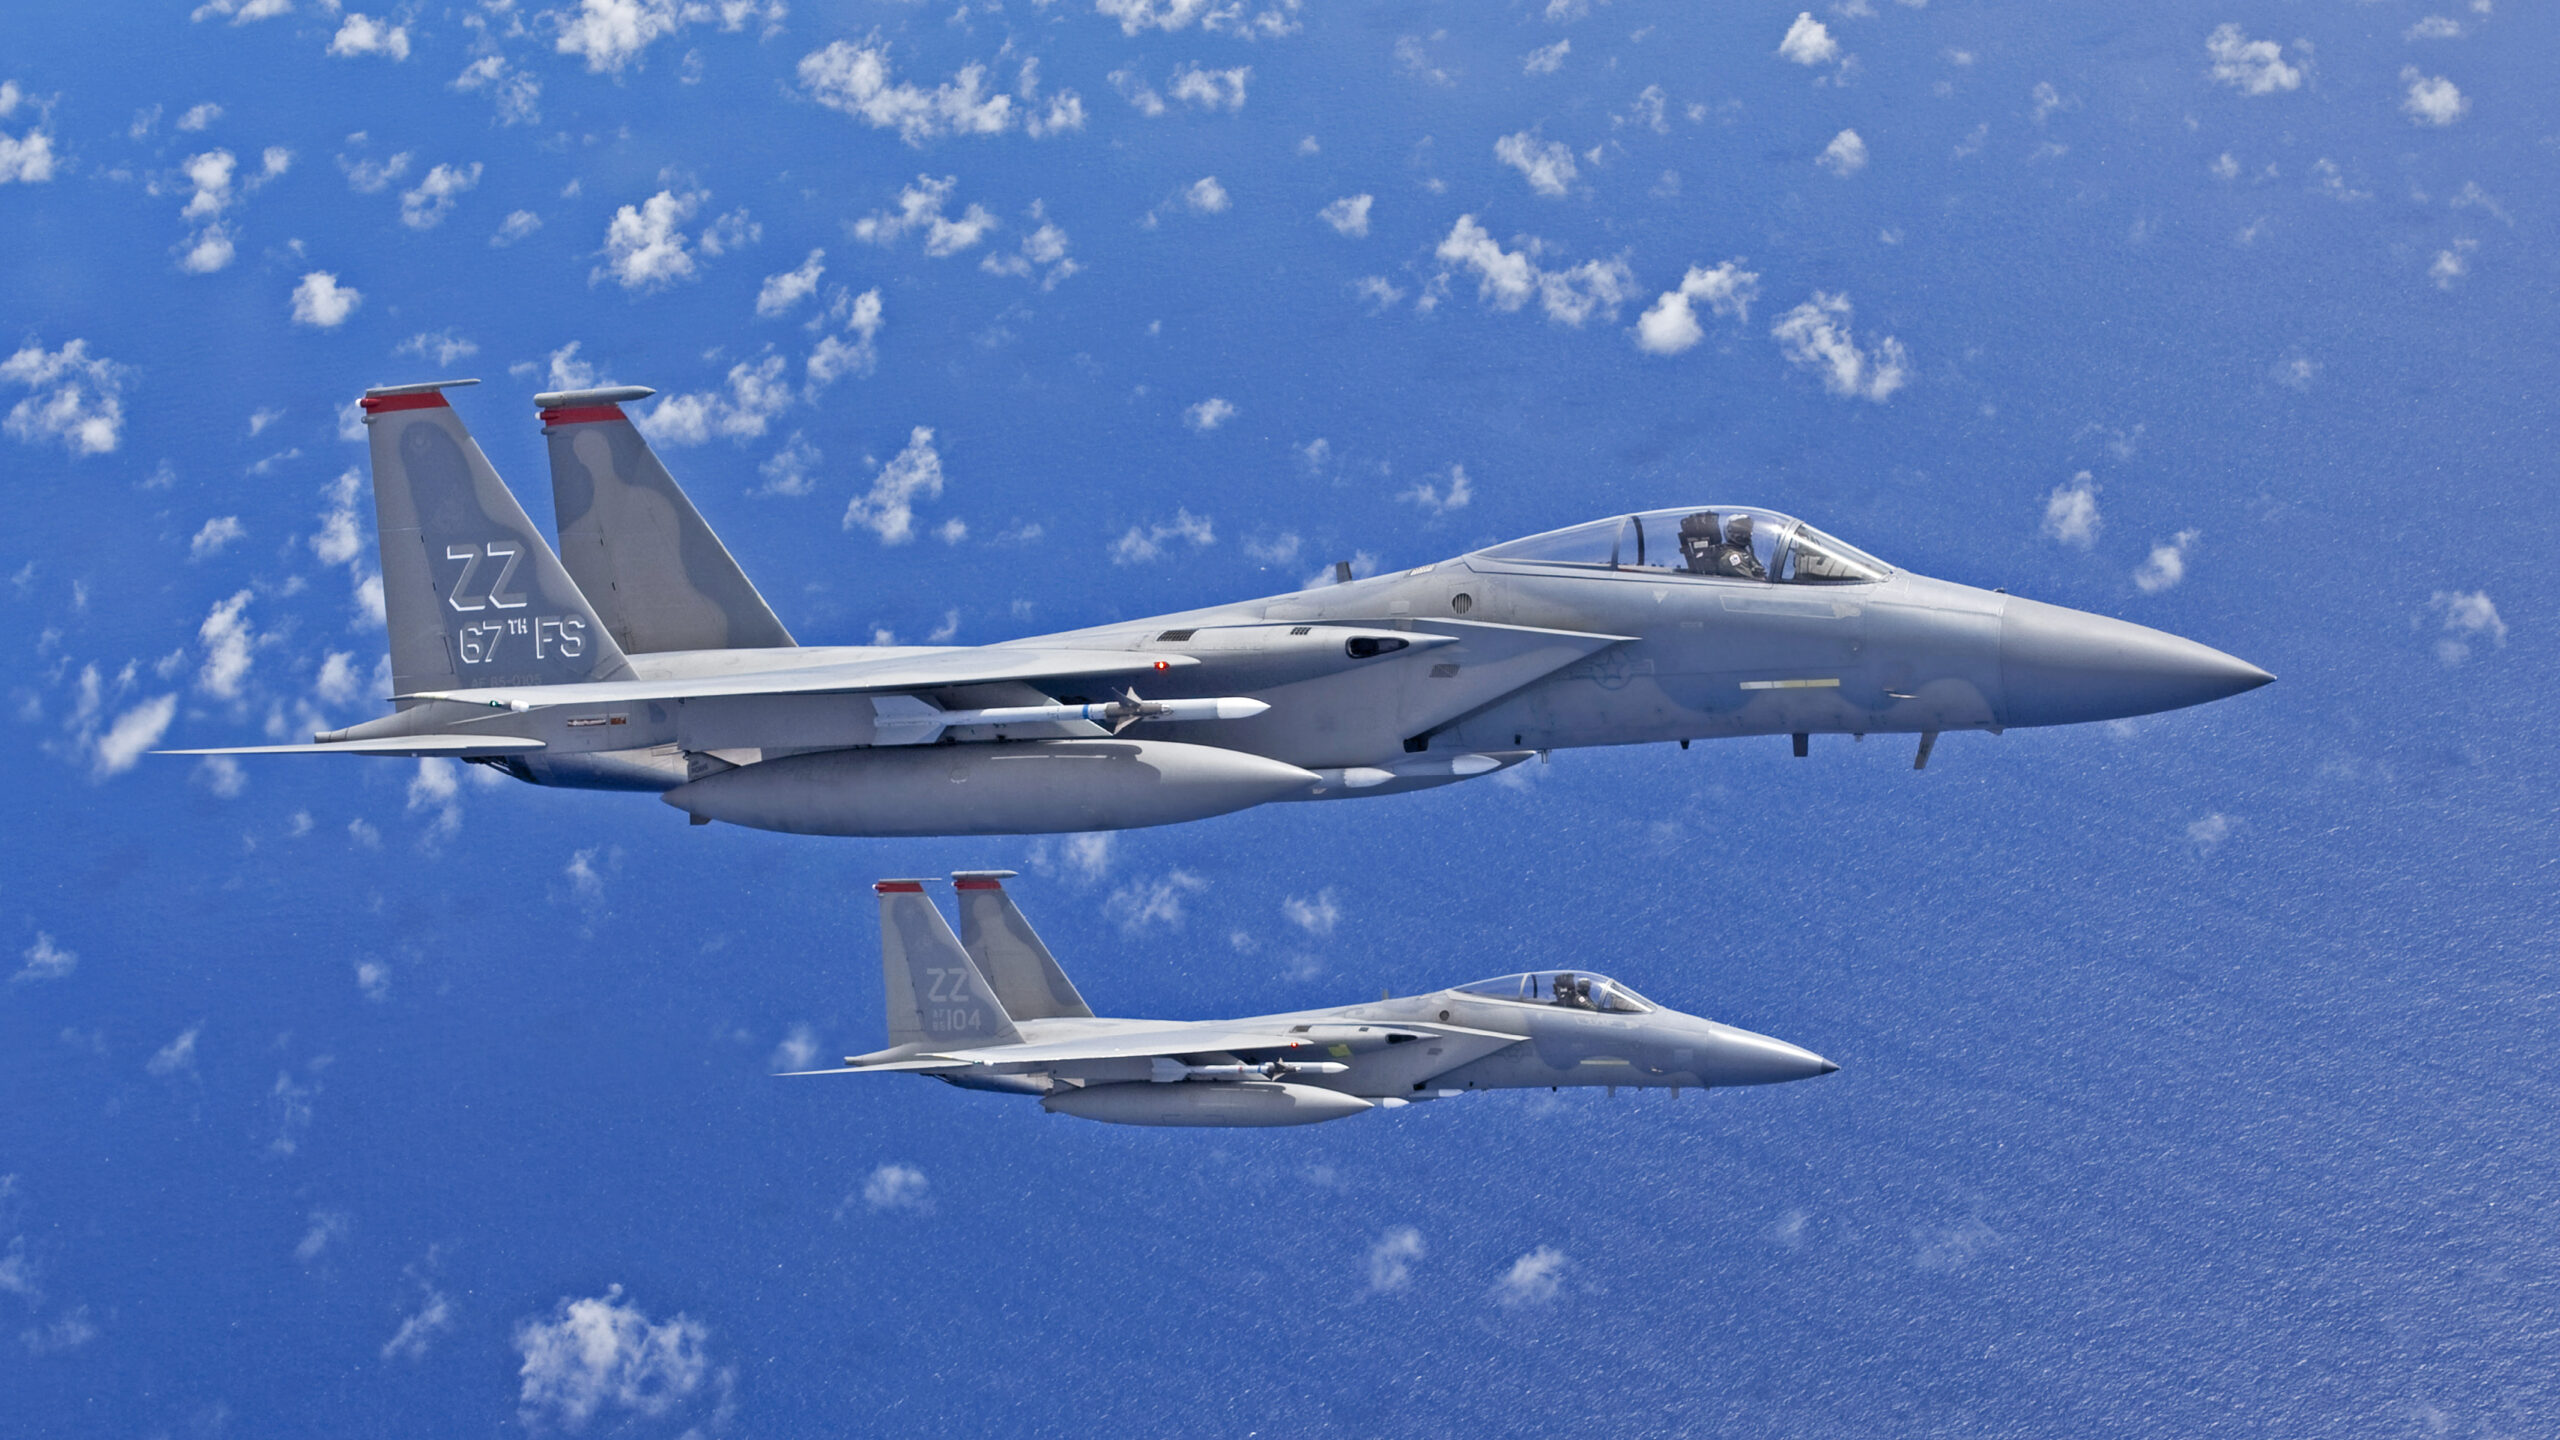 U.S. F-15s To Leave Okinawa Without Permanent Replacement: Report